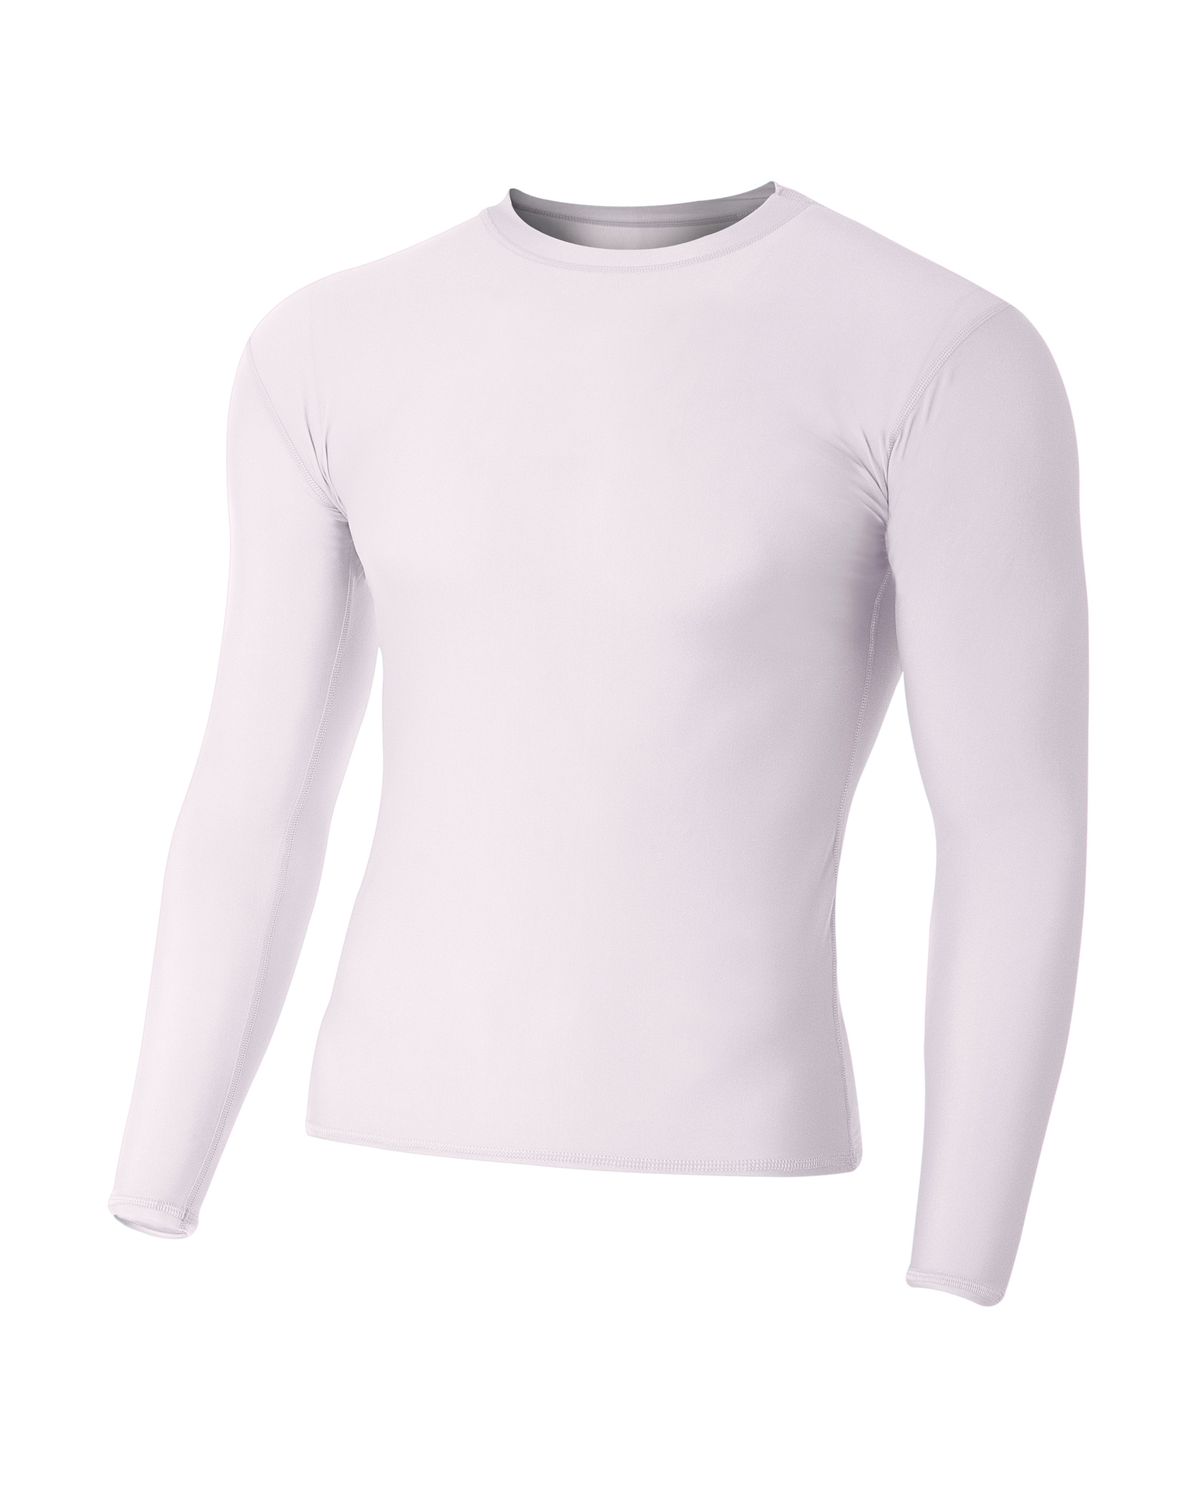 'A4 NB3133 Youth Long Sleeve Compression Crew'